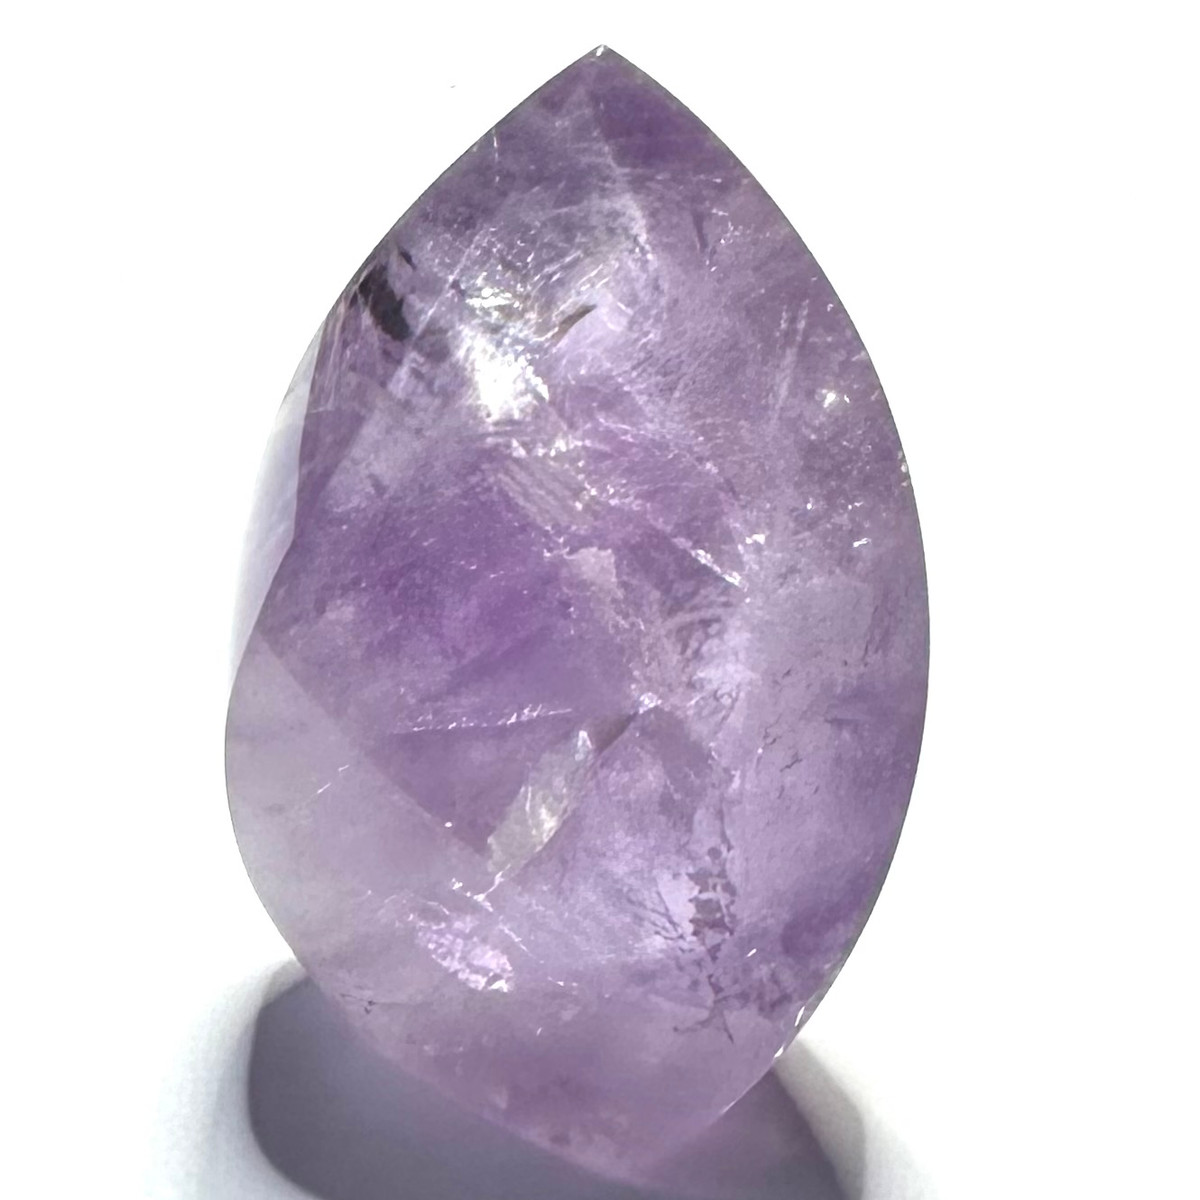 One of a Kind Amethyst with Rainbow Inclusions Flame Tower-2 1/4 x 1 1/2"